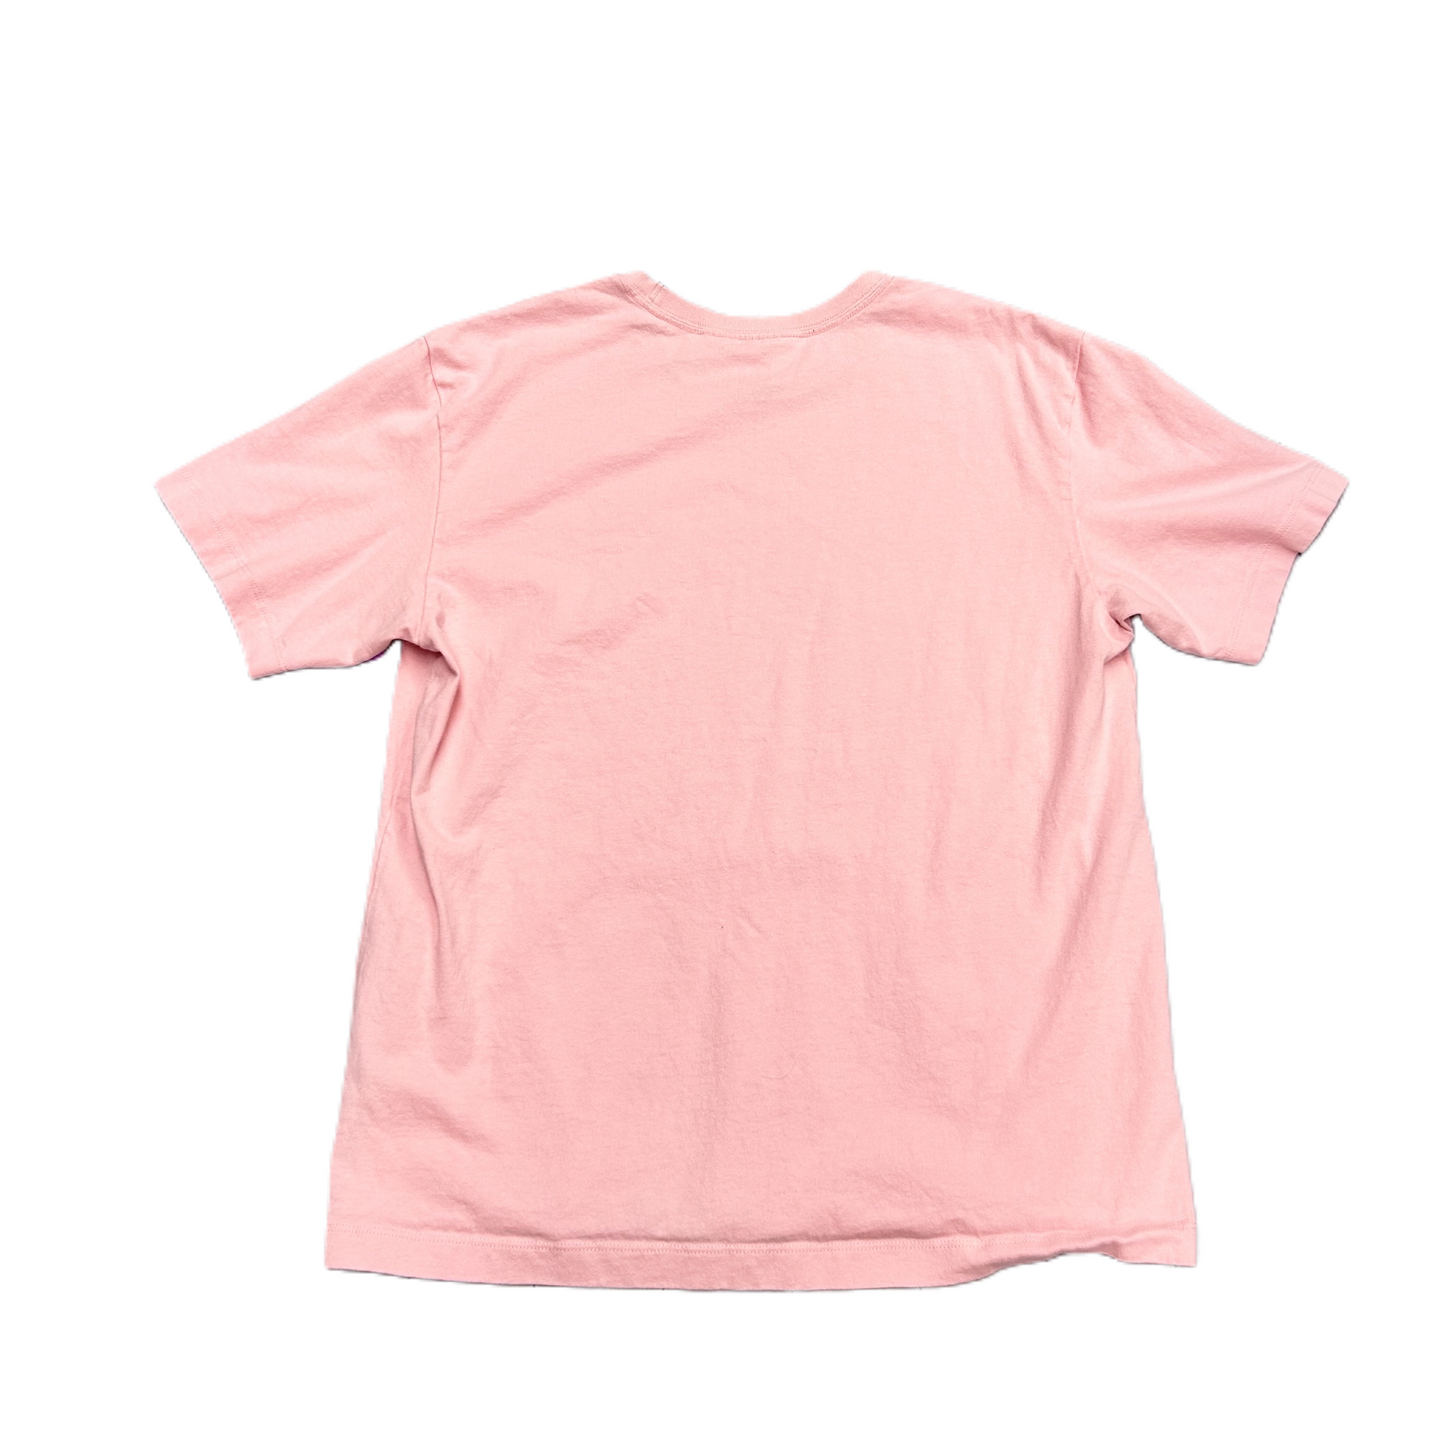 Pink Top Short Sleeve By Savage Fenty , Size: S